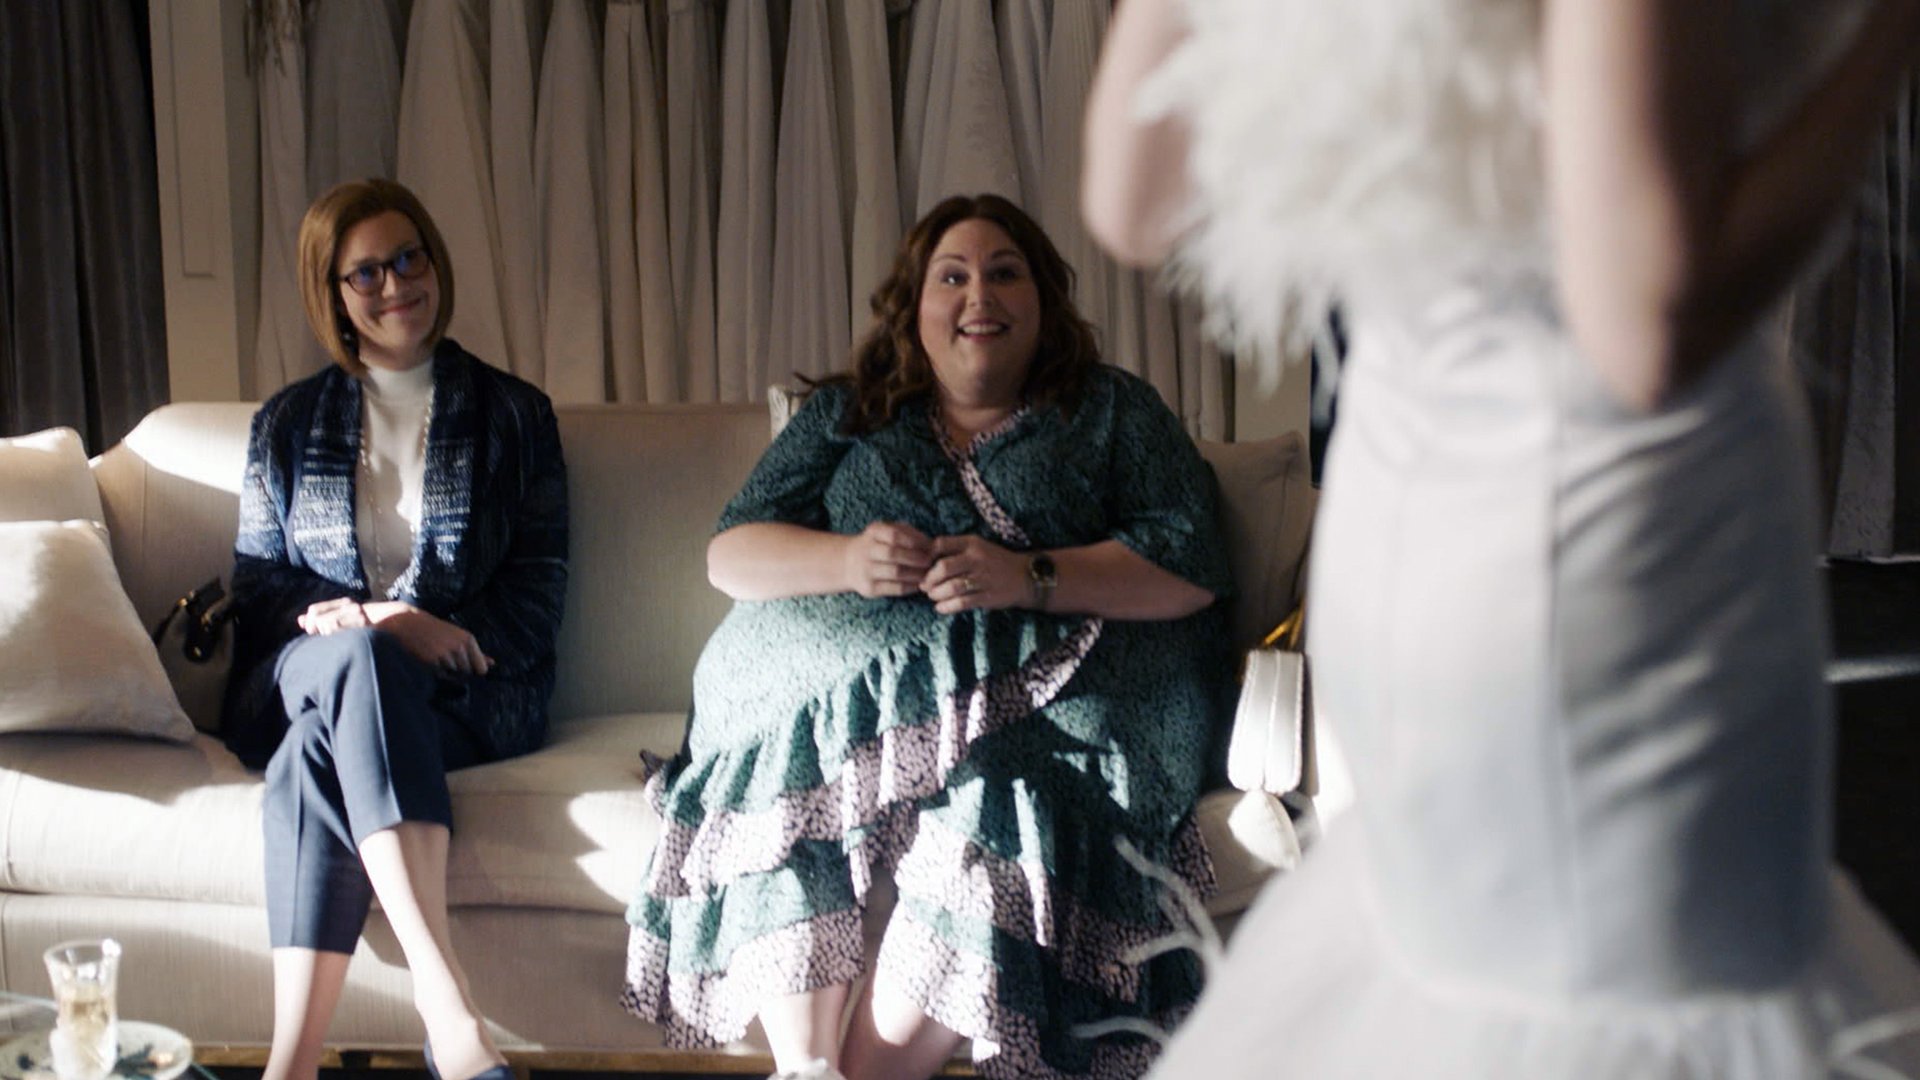 Mandy Moore as Rebecca and Chrissy Metz as Kate watch Caitlin Thompson as Madison in a wedding dress in ‘This Is Us’ Season 5 Episode 14